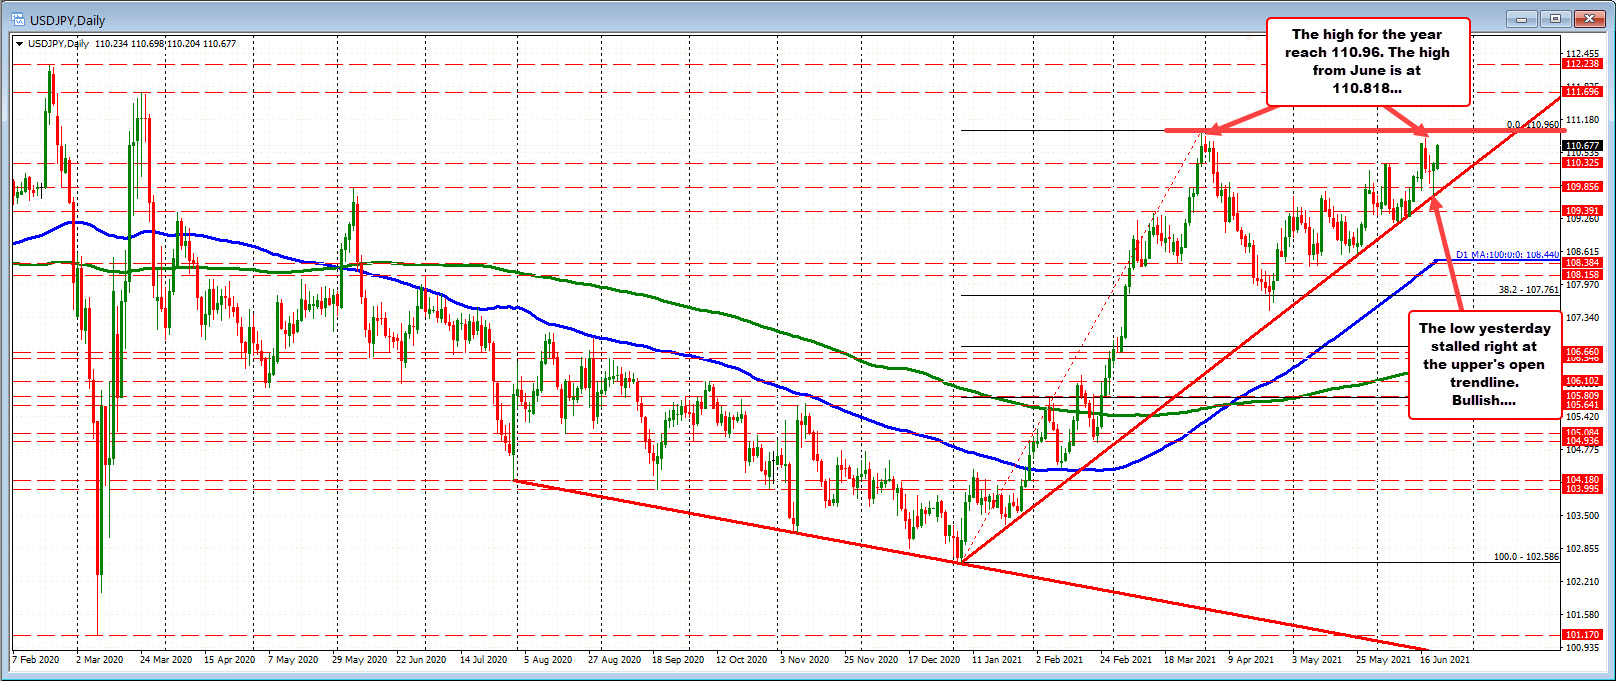 USDJPY on the daily chart